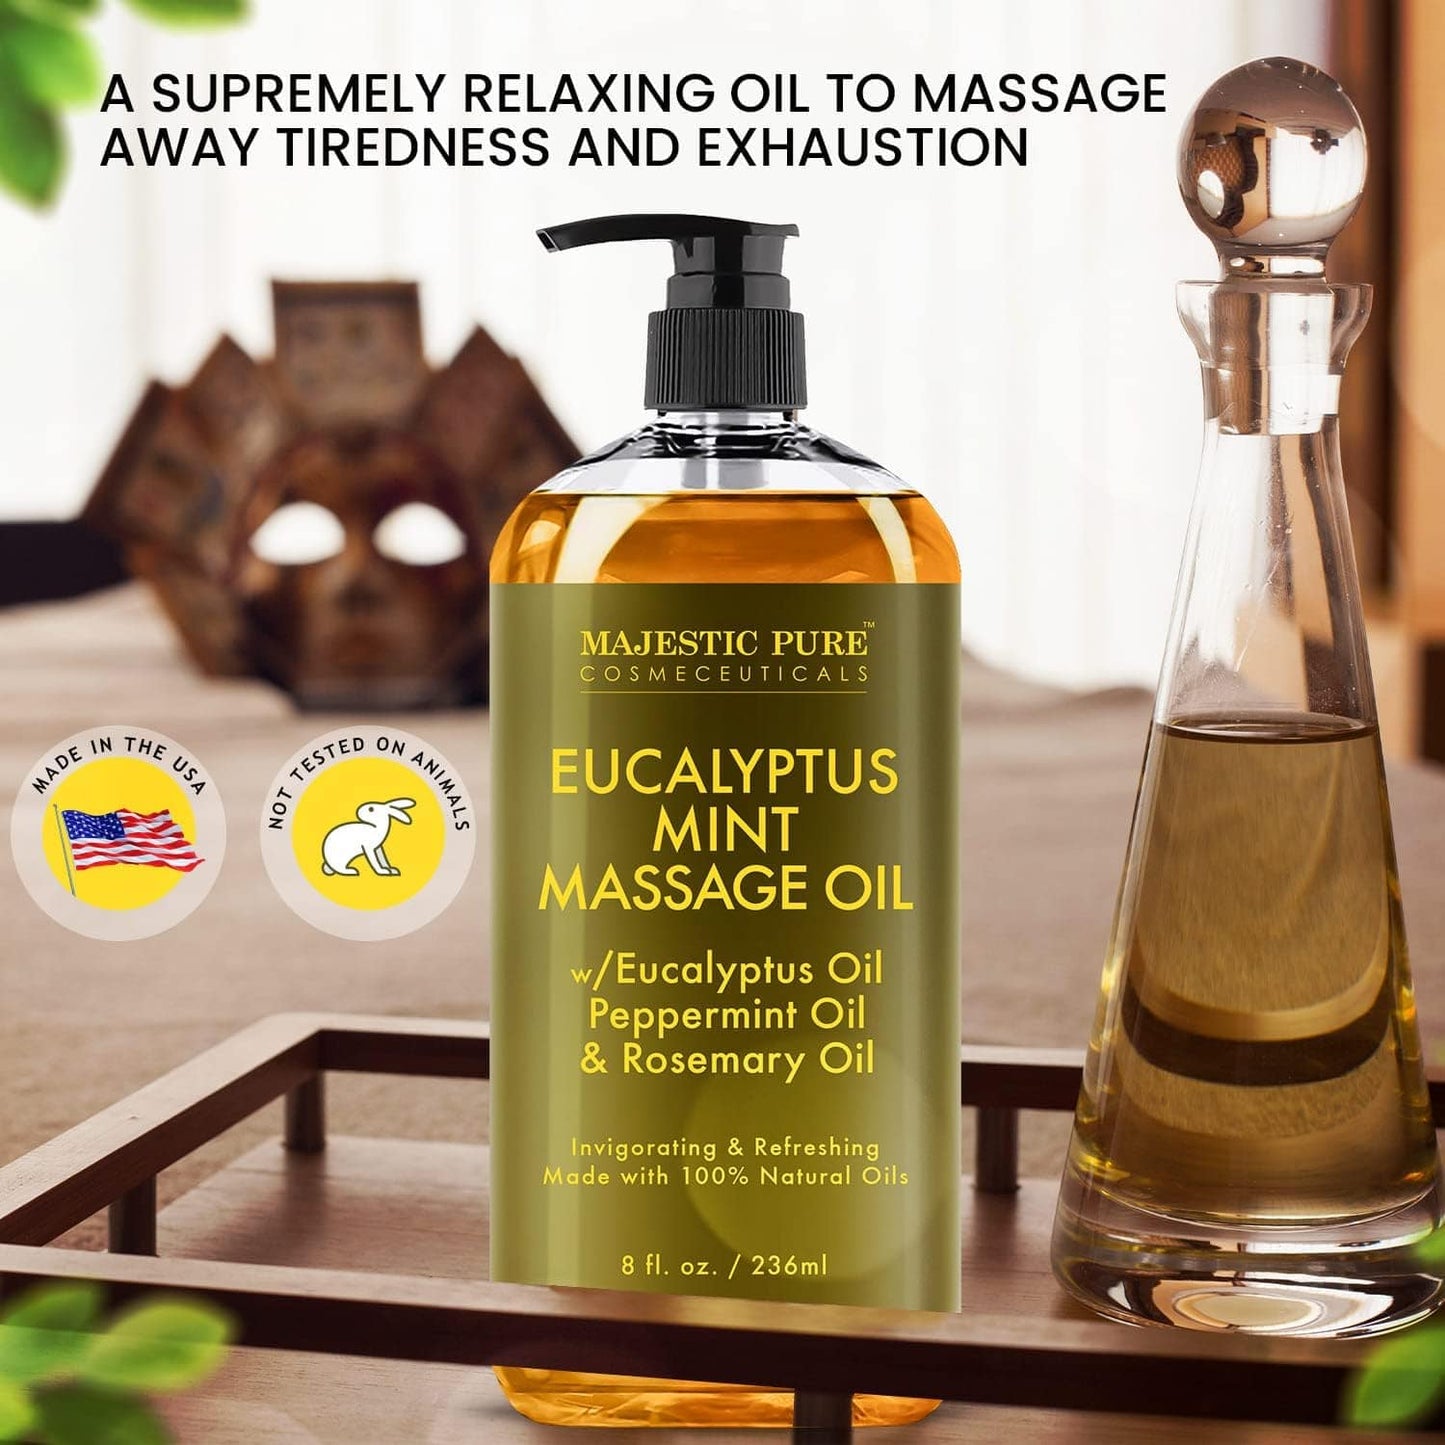 MAJESTIC PURE Eucalyptus Mint Massage Oil - Invigorating, Refreshing, and Relaxing - Massage, Made with Natural Oils - for All Skin Types - Men and Women - Made in USA - 8 fl oz